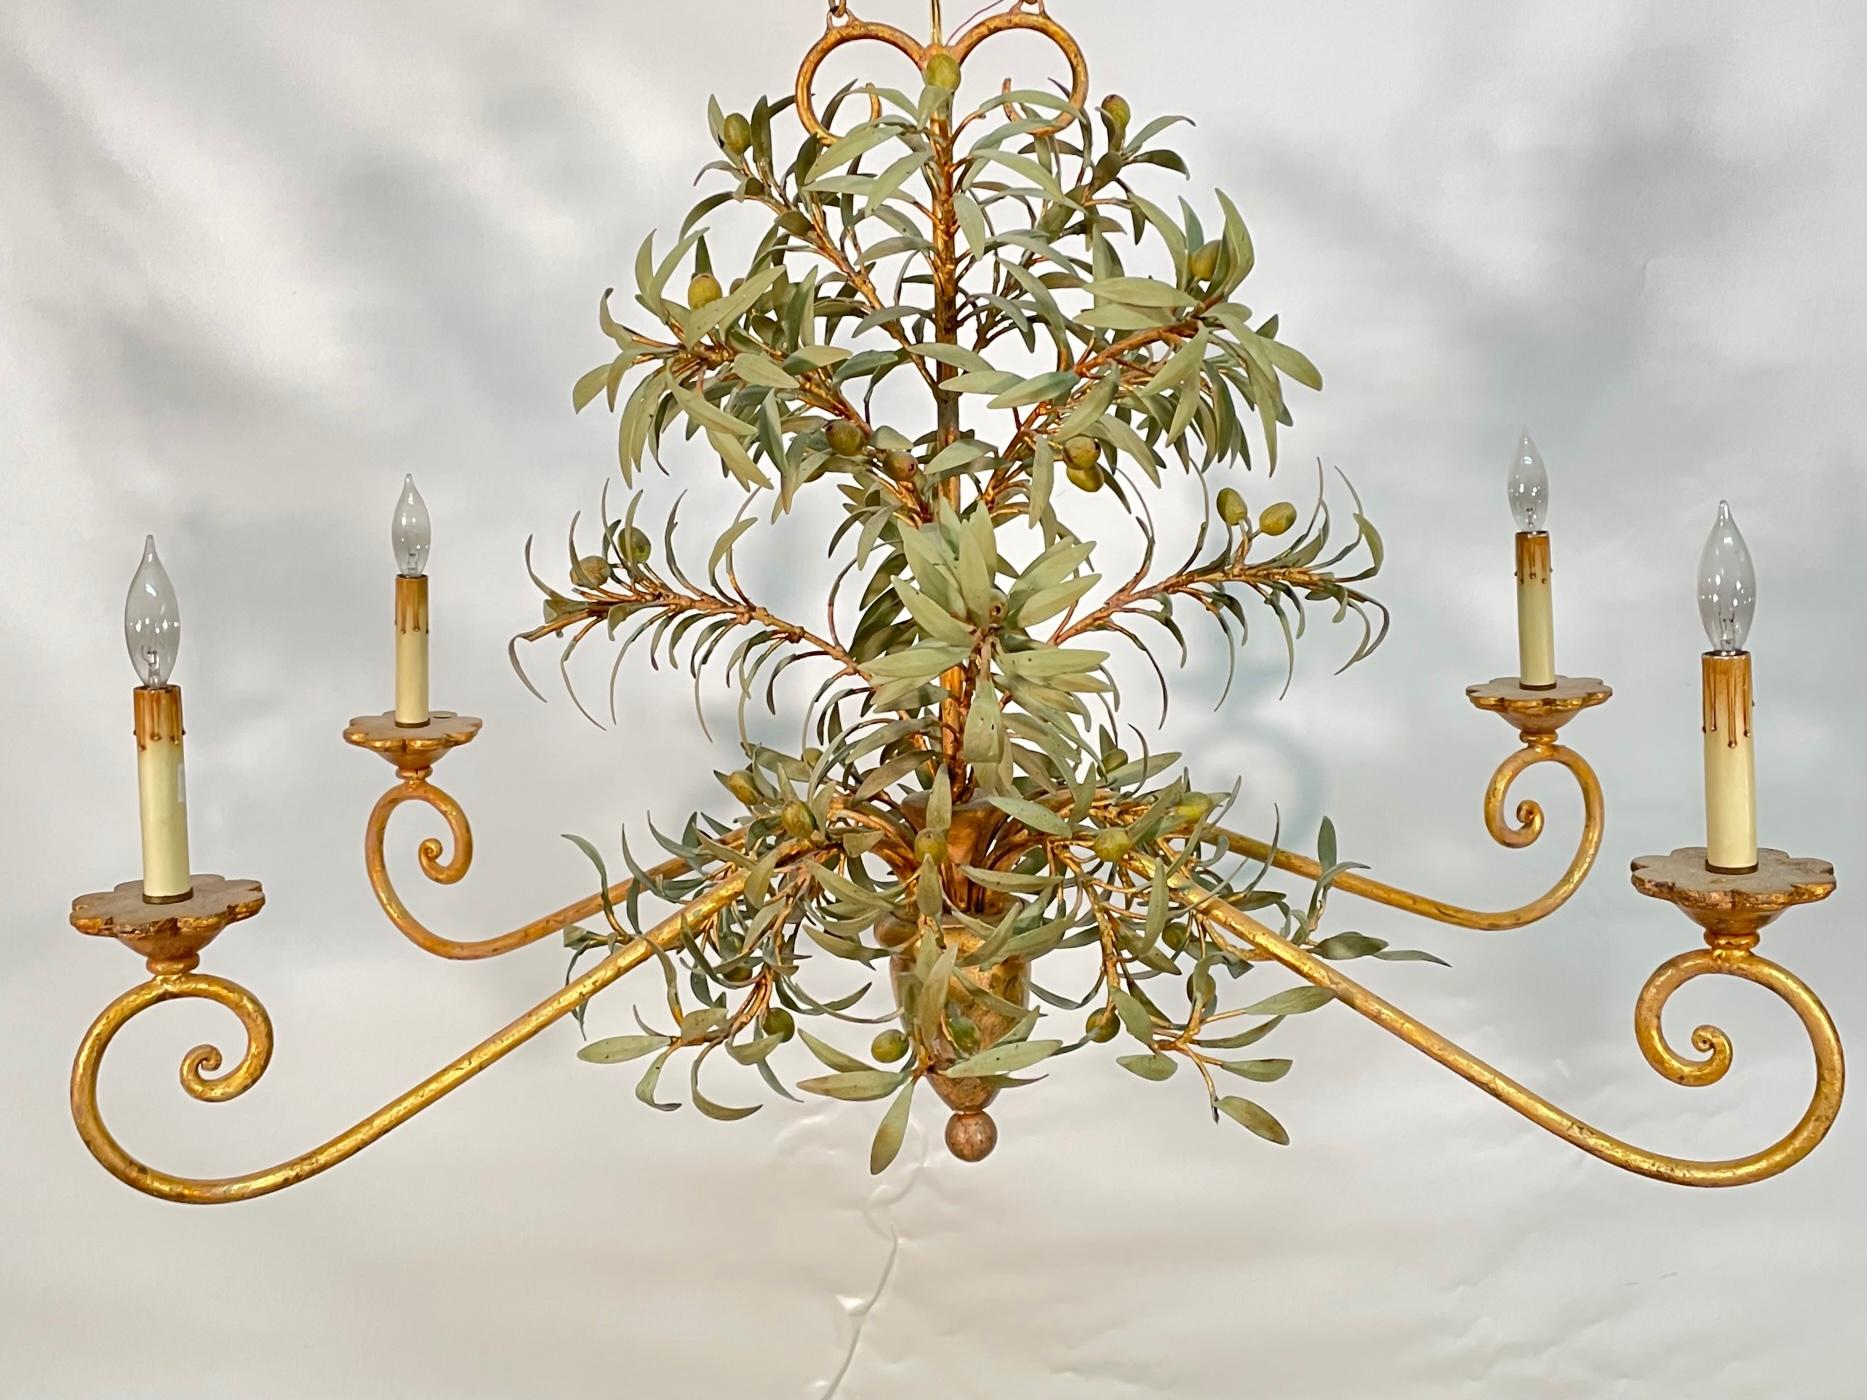 Vintage tole chandelier by Currey and Co. features sculptural leaves and berries and gold gilt finish. Very good condition with minor imperfections consistent with age.
 